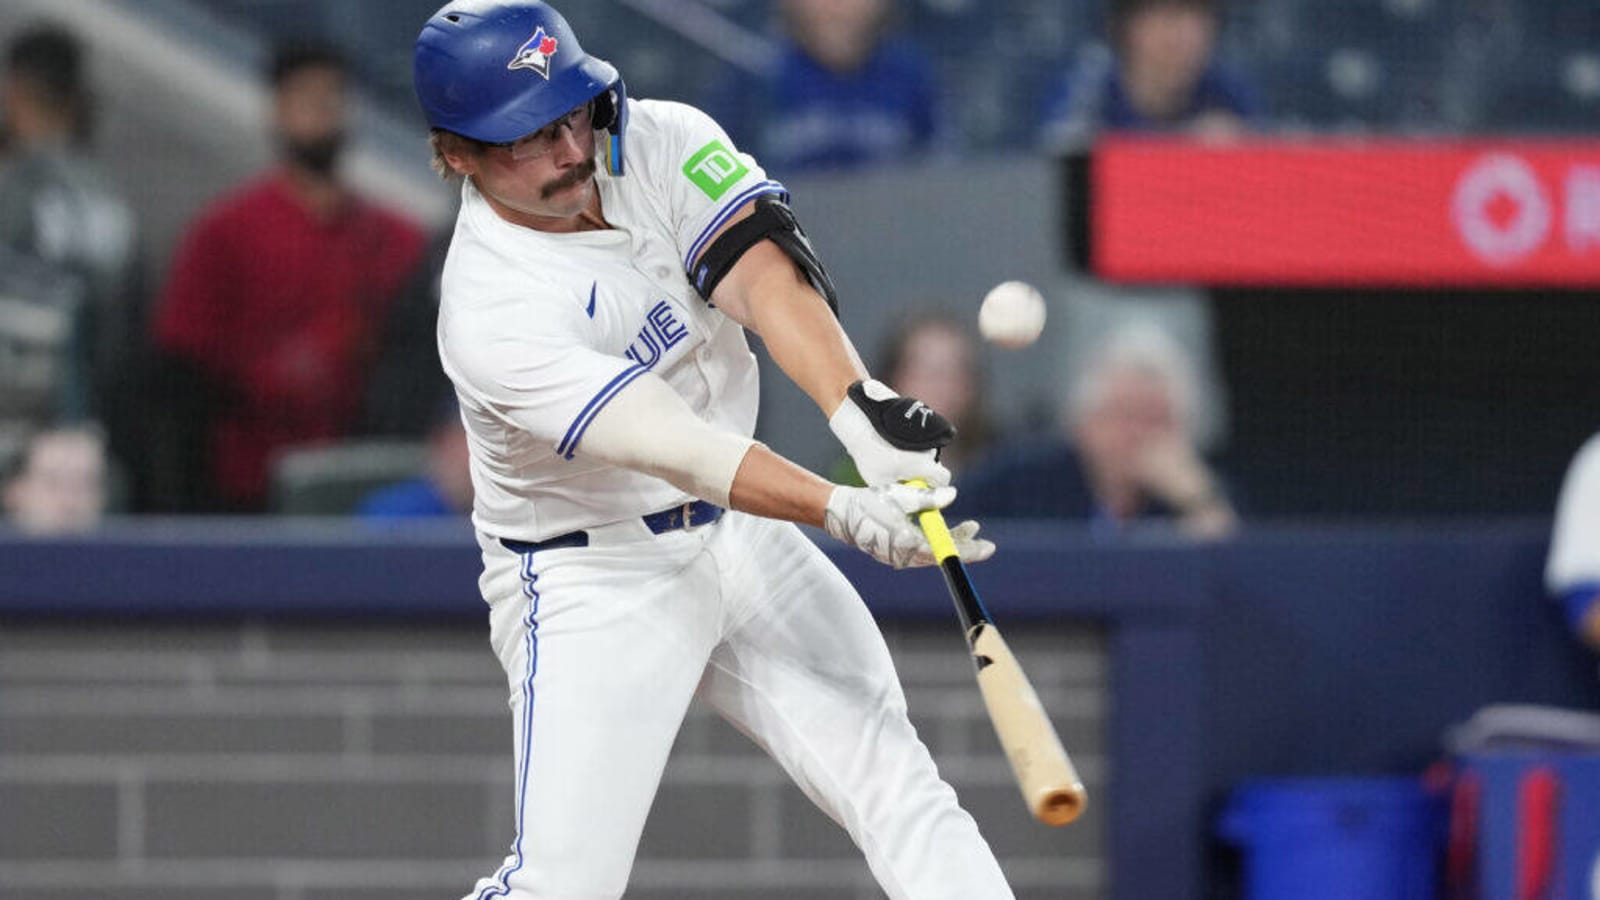 Blue Jays Are Seeing Sparked Defense From This Player